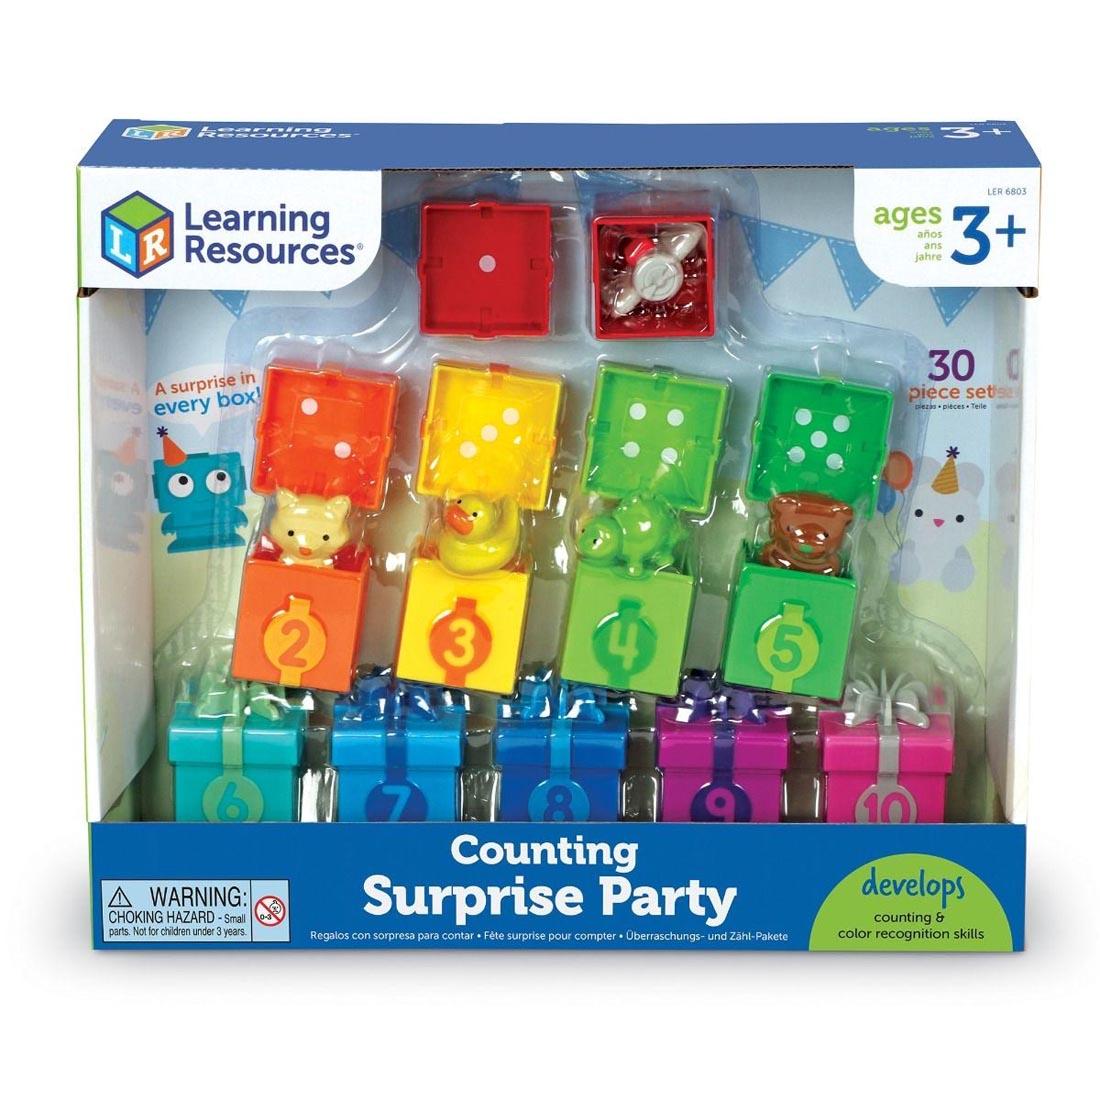 Counting Surprise Party box contains one little gift box for each number 1-10